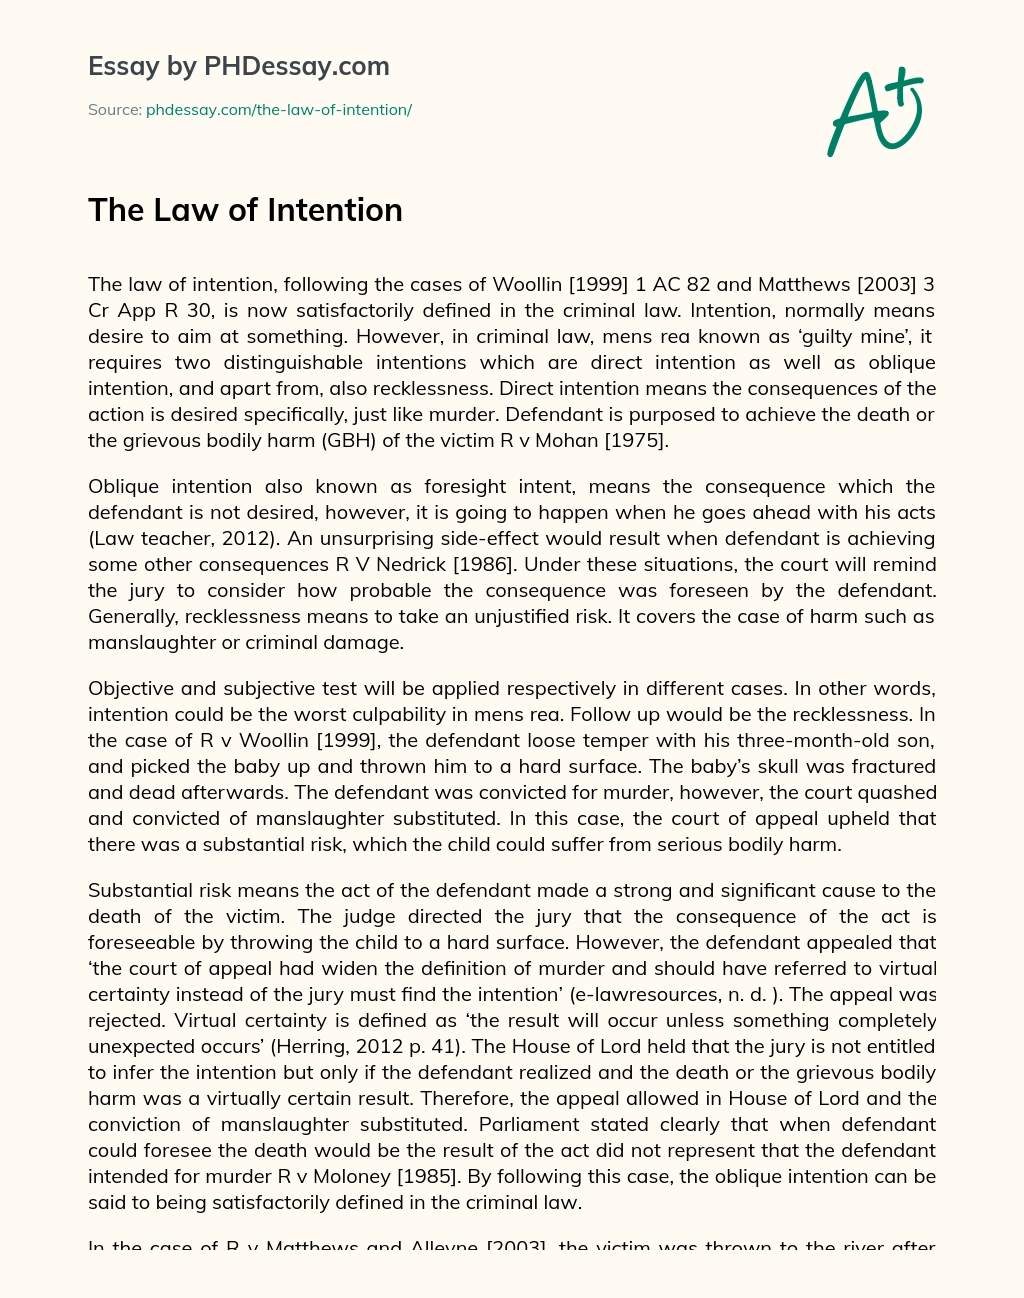 The Law of Intention essay